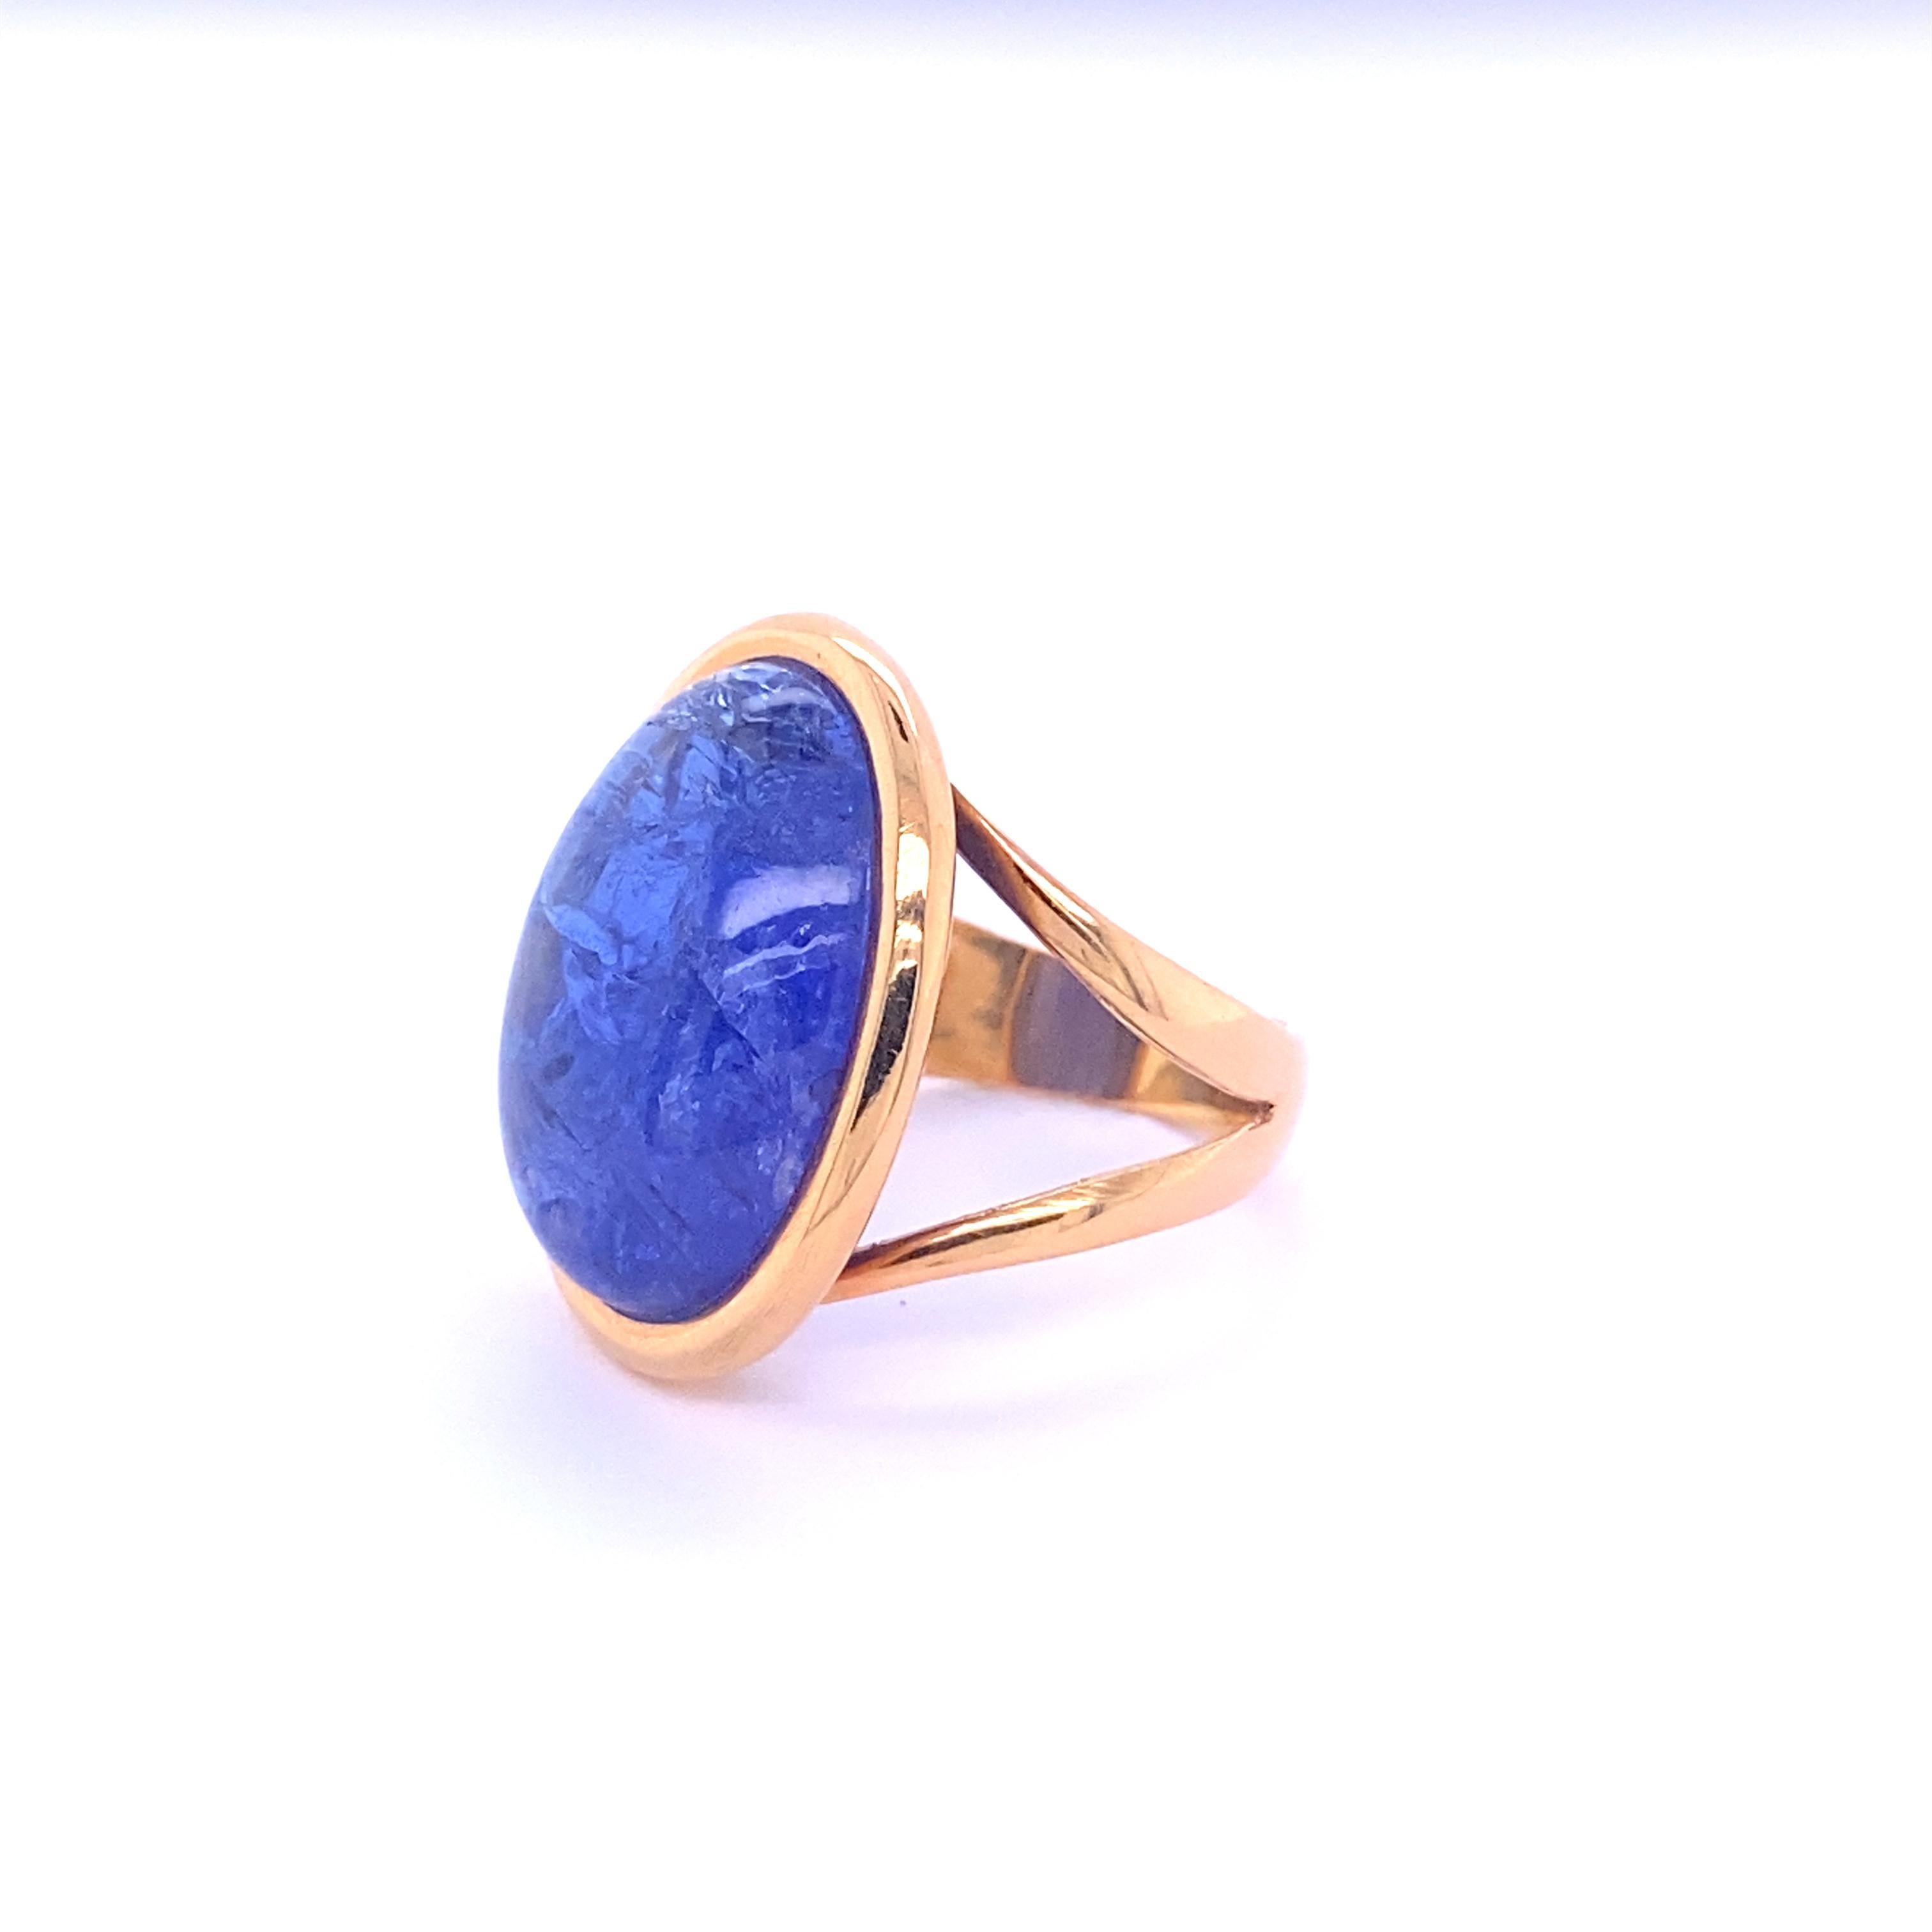 Discover the sumptuous radiance of our magnificent 18-carat rose gold cocktail ring, showcasing a dazzling 0.23-carat tanzanite at the apex of its refined design. This exceptional piece gracefully measures 2.1 centimeters in length and 1.4